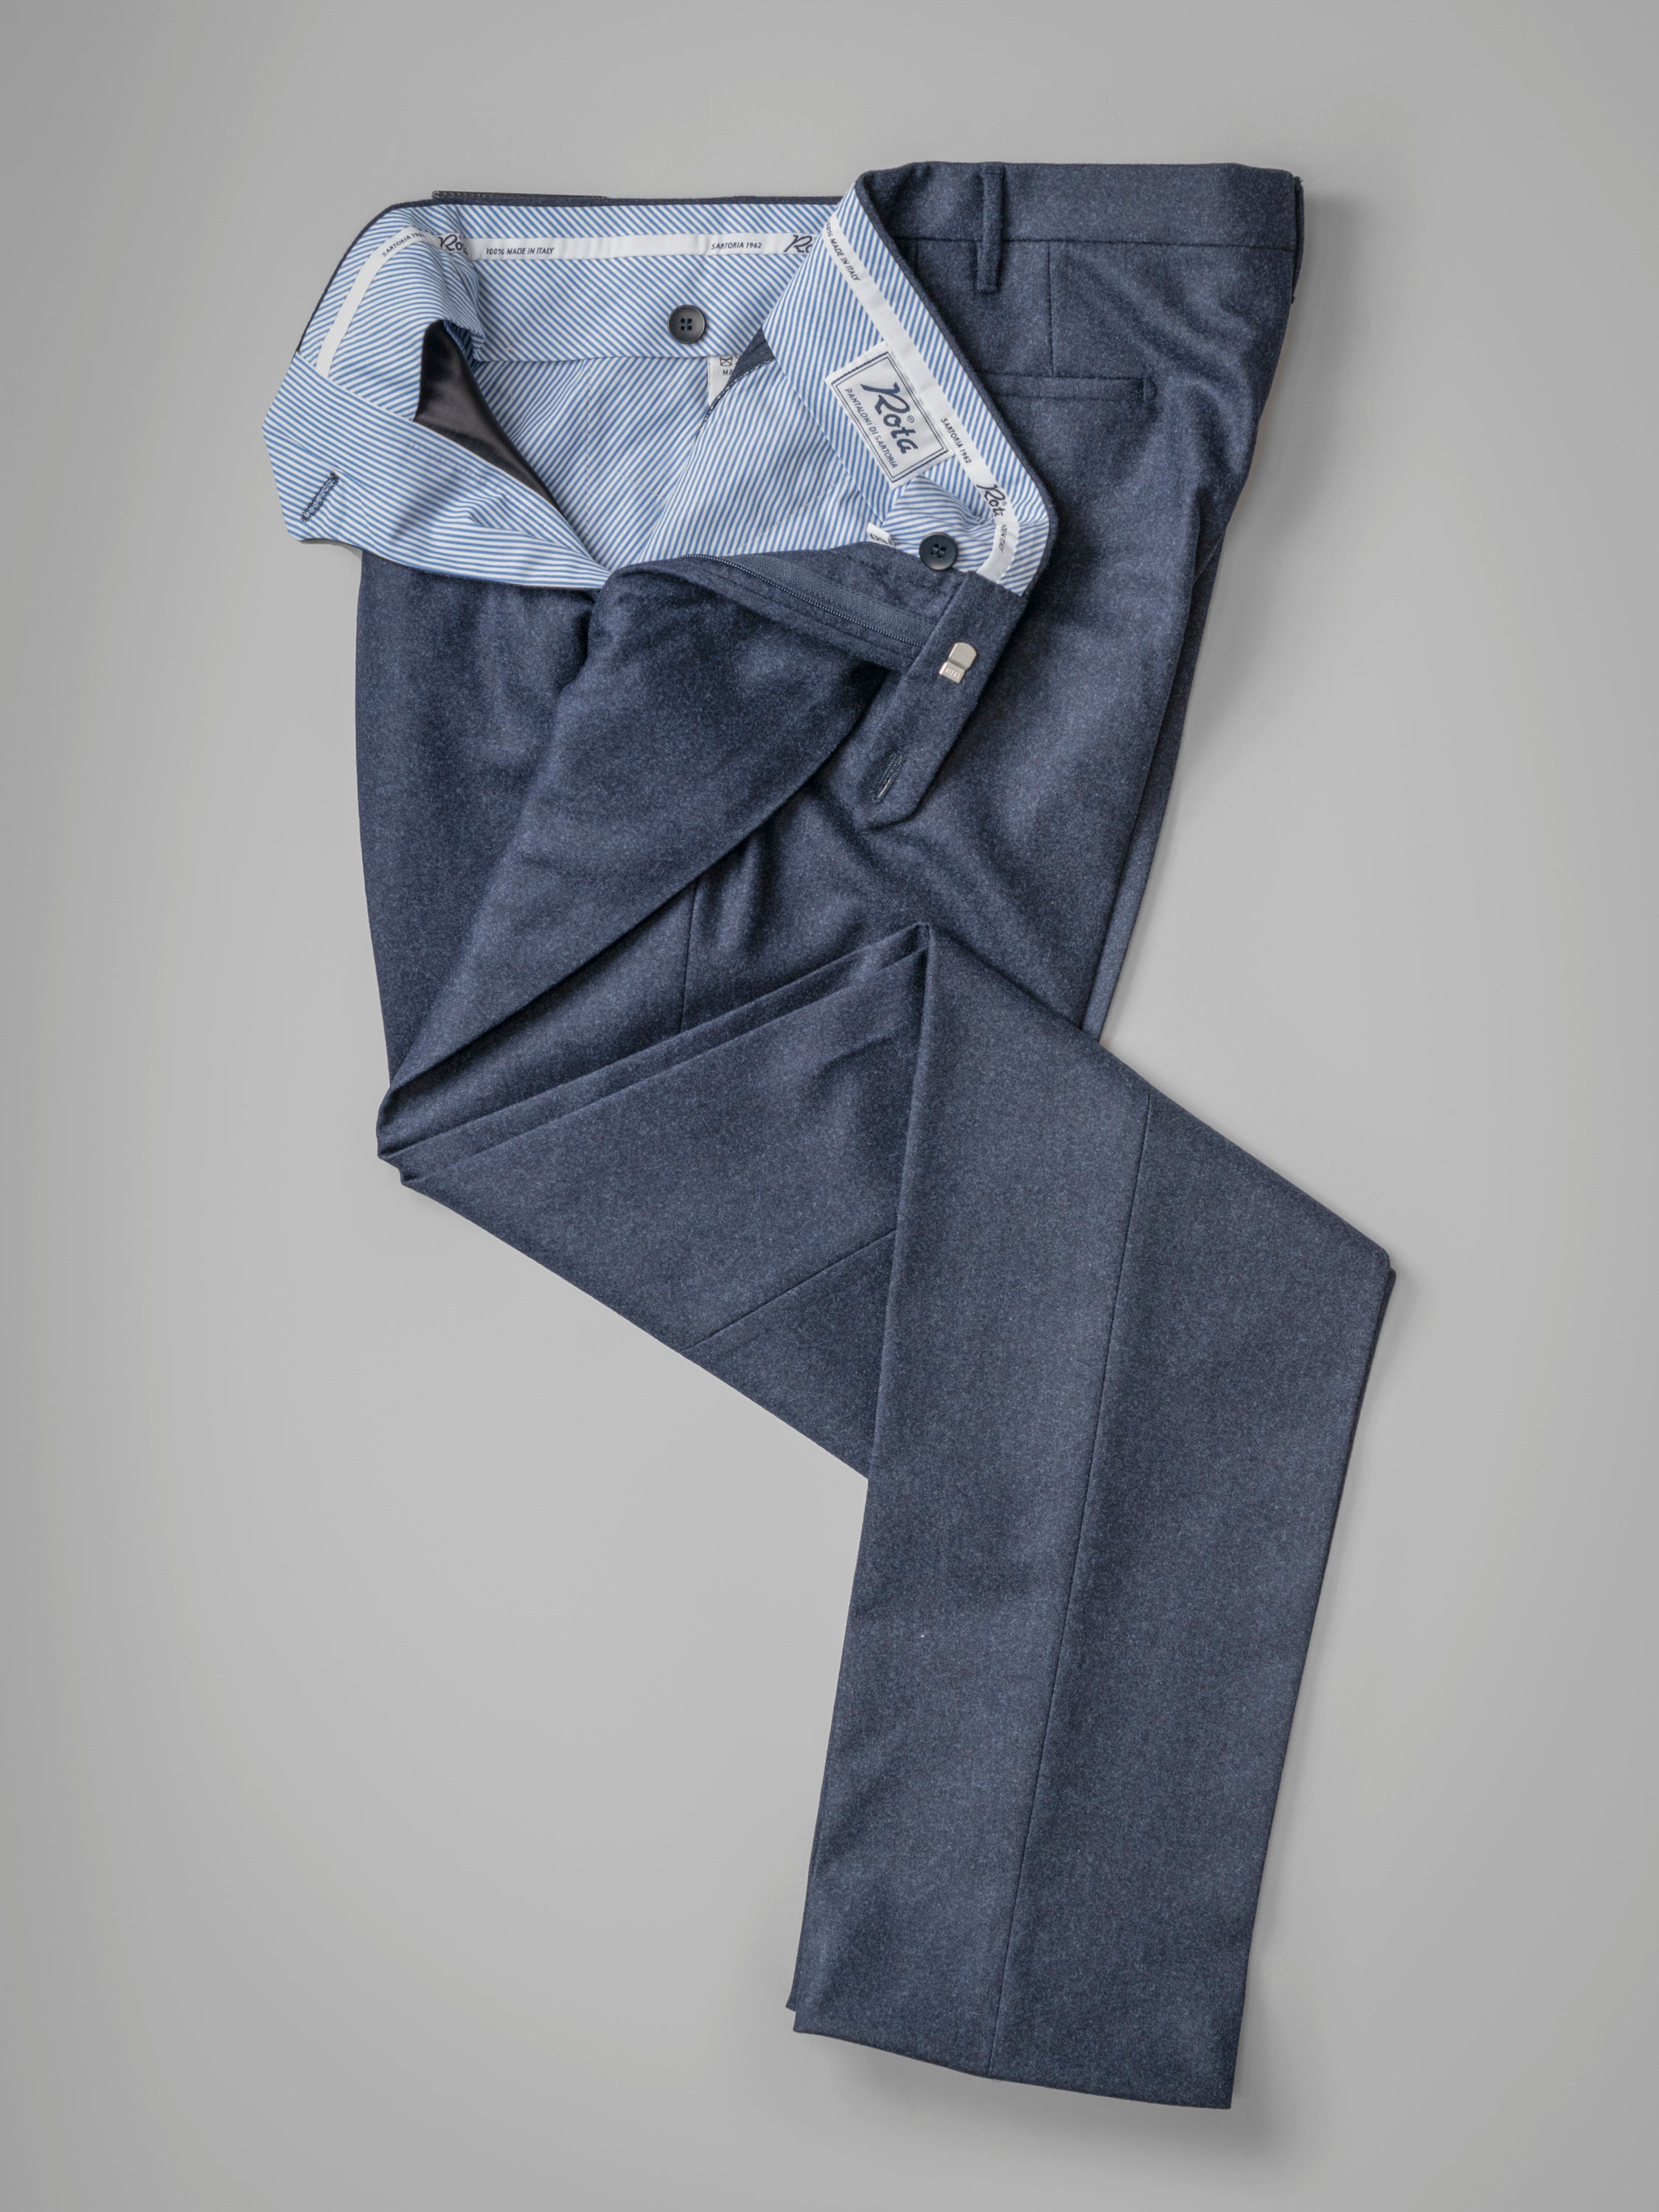 Tailored Fit Light Blue Flannel Trousers